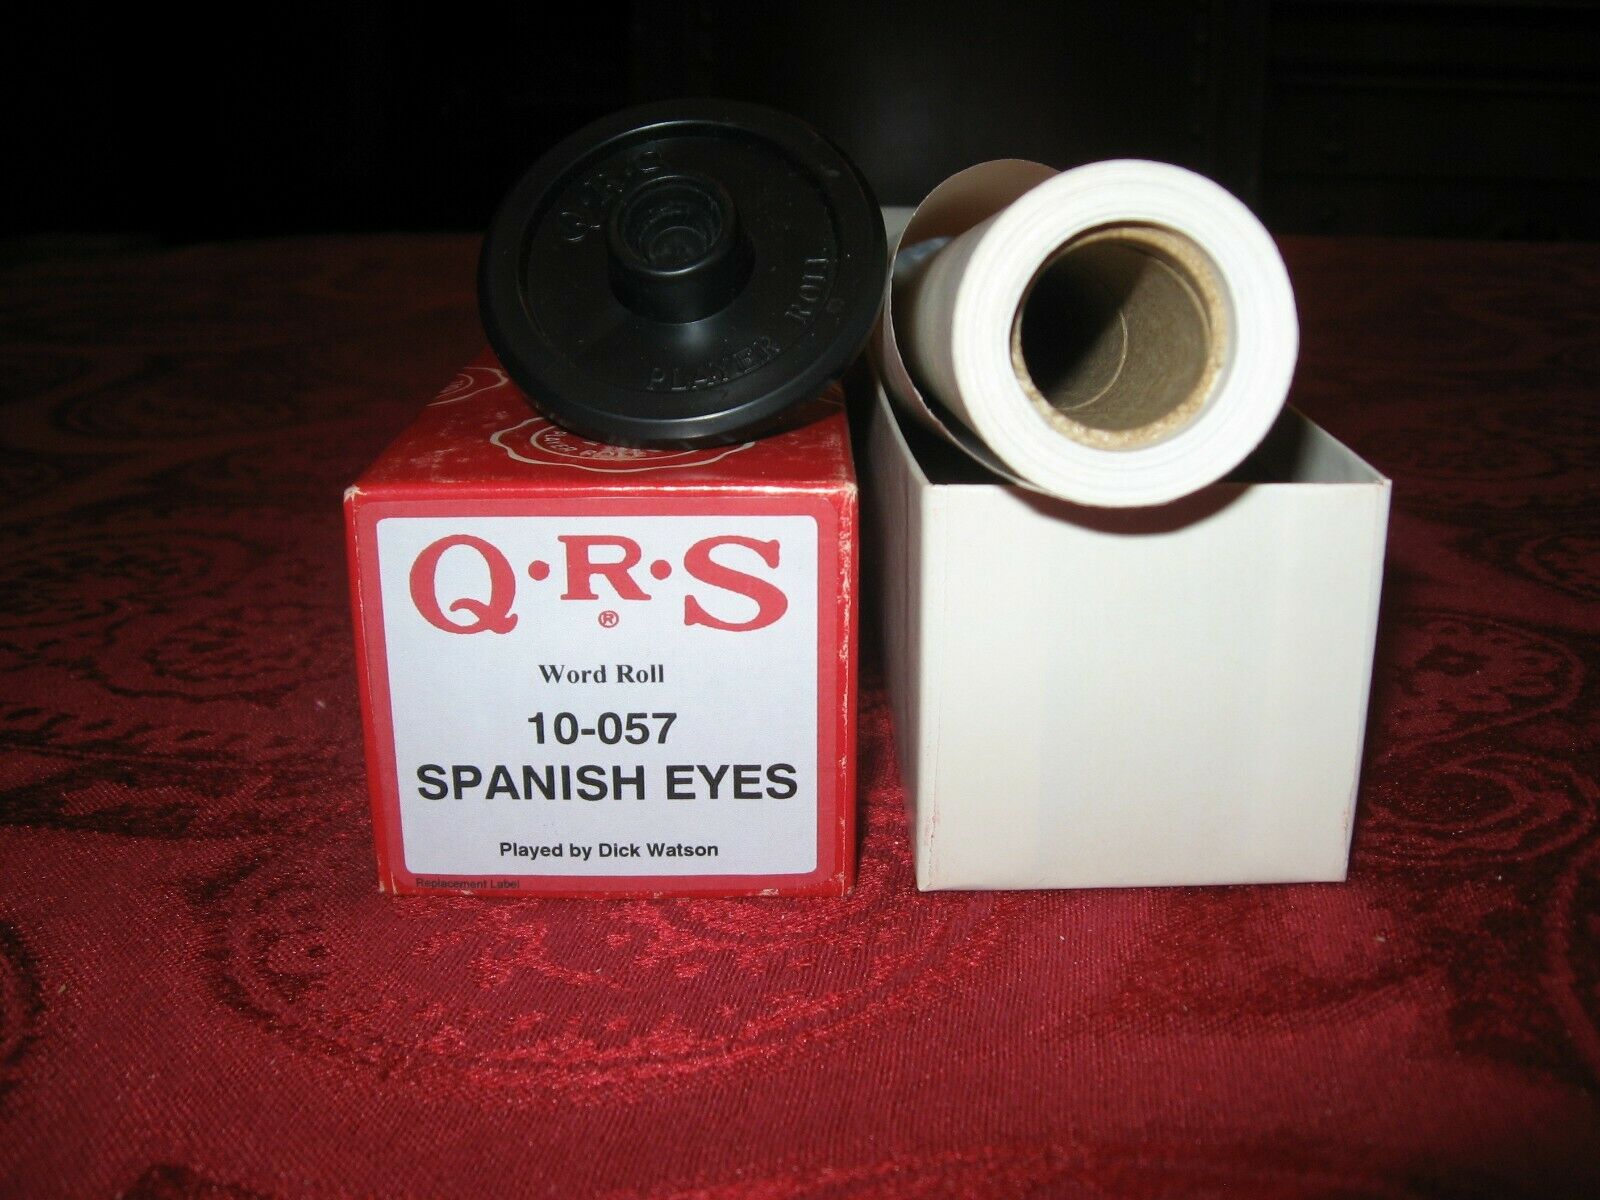 Spanish Eyes - Qrs Player Piano Roll #10-057